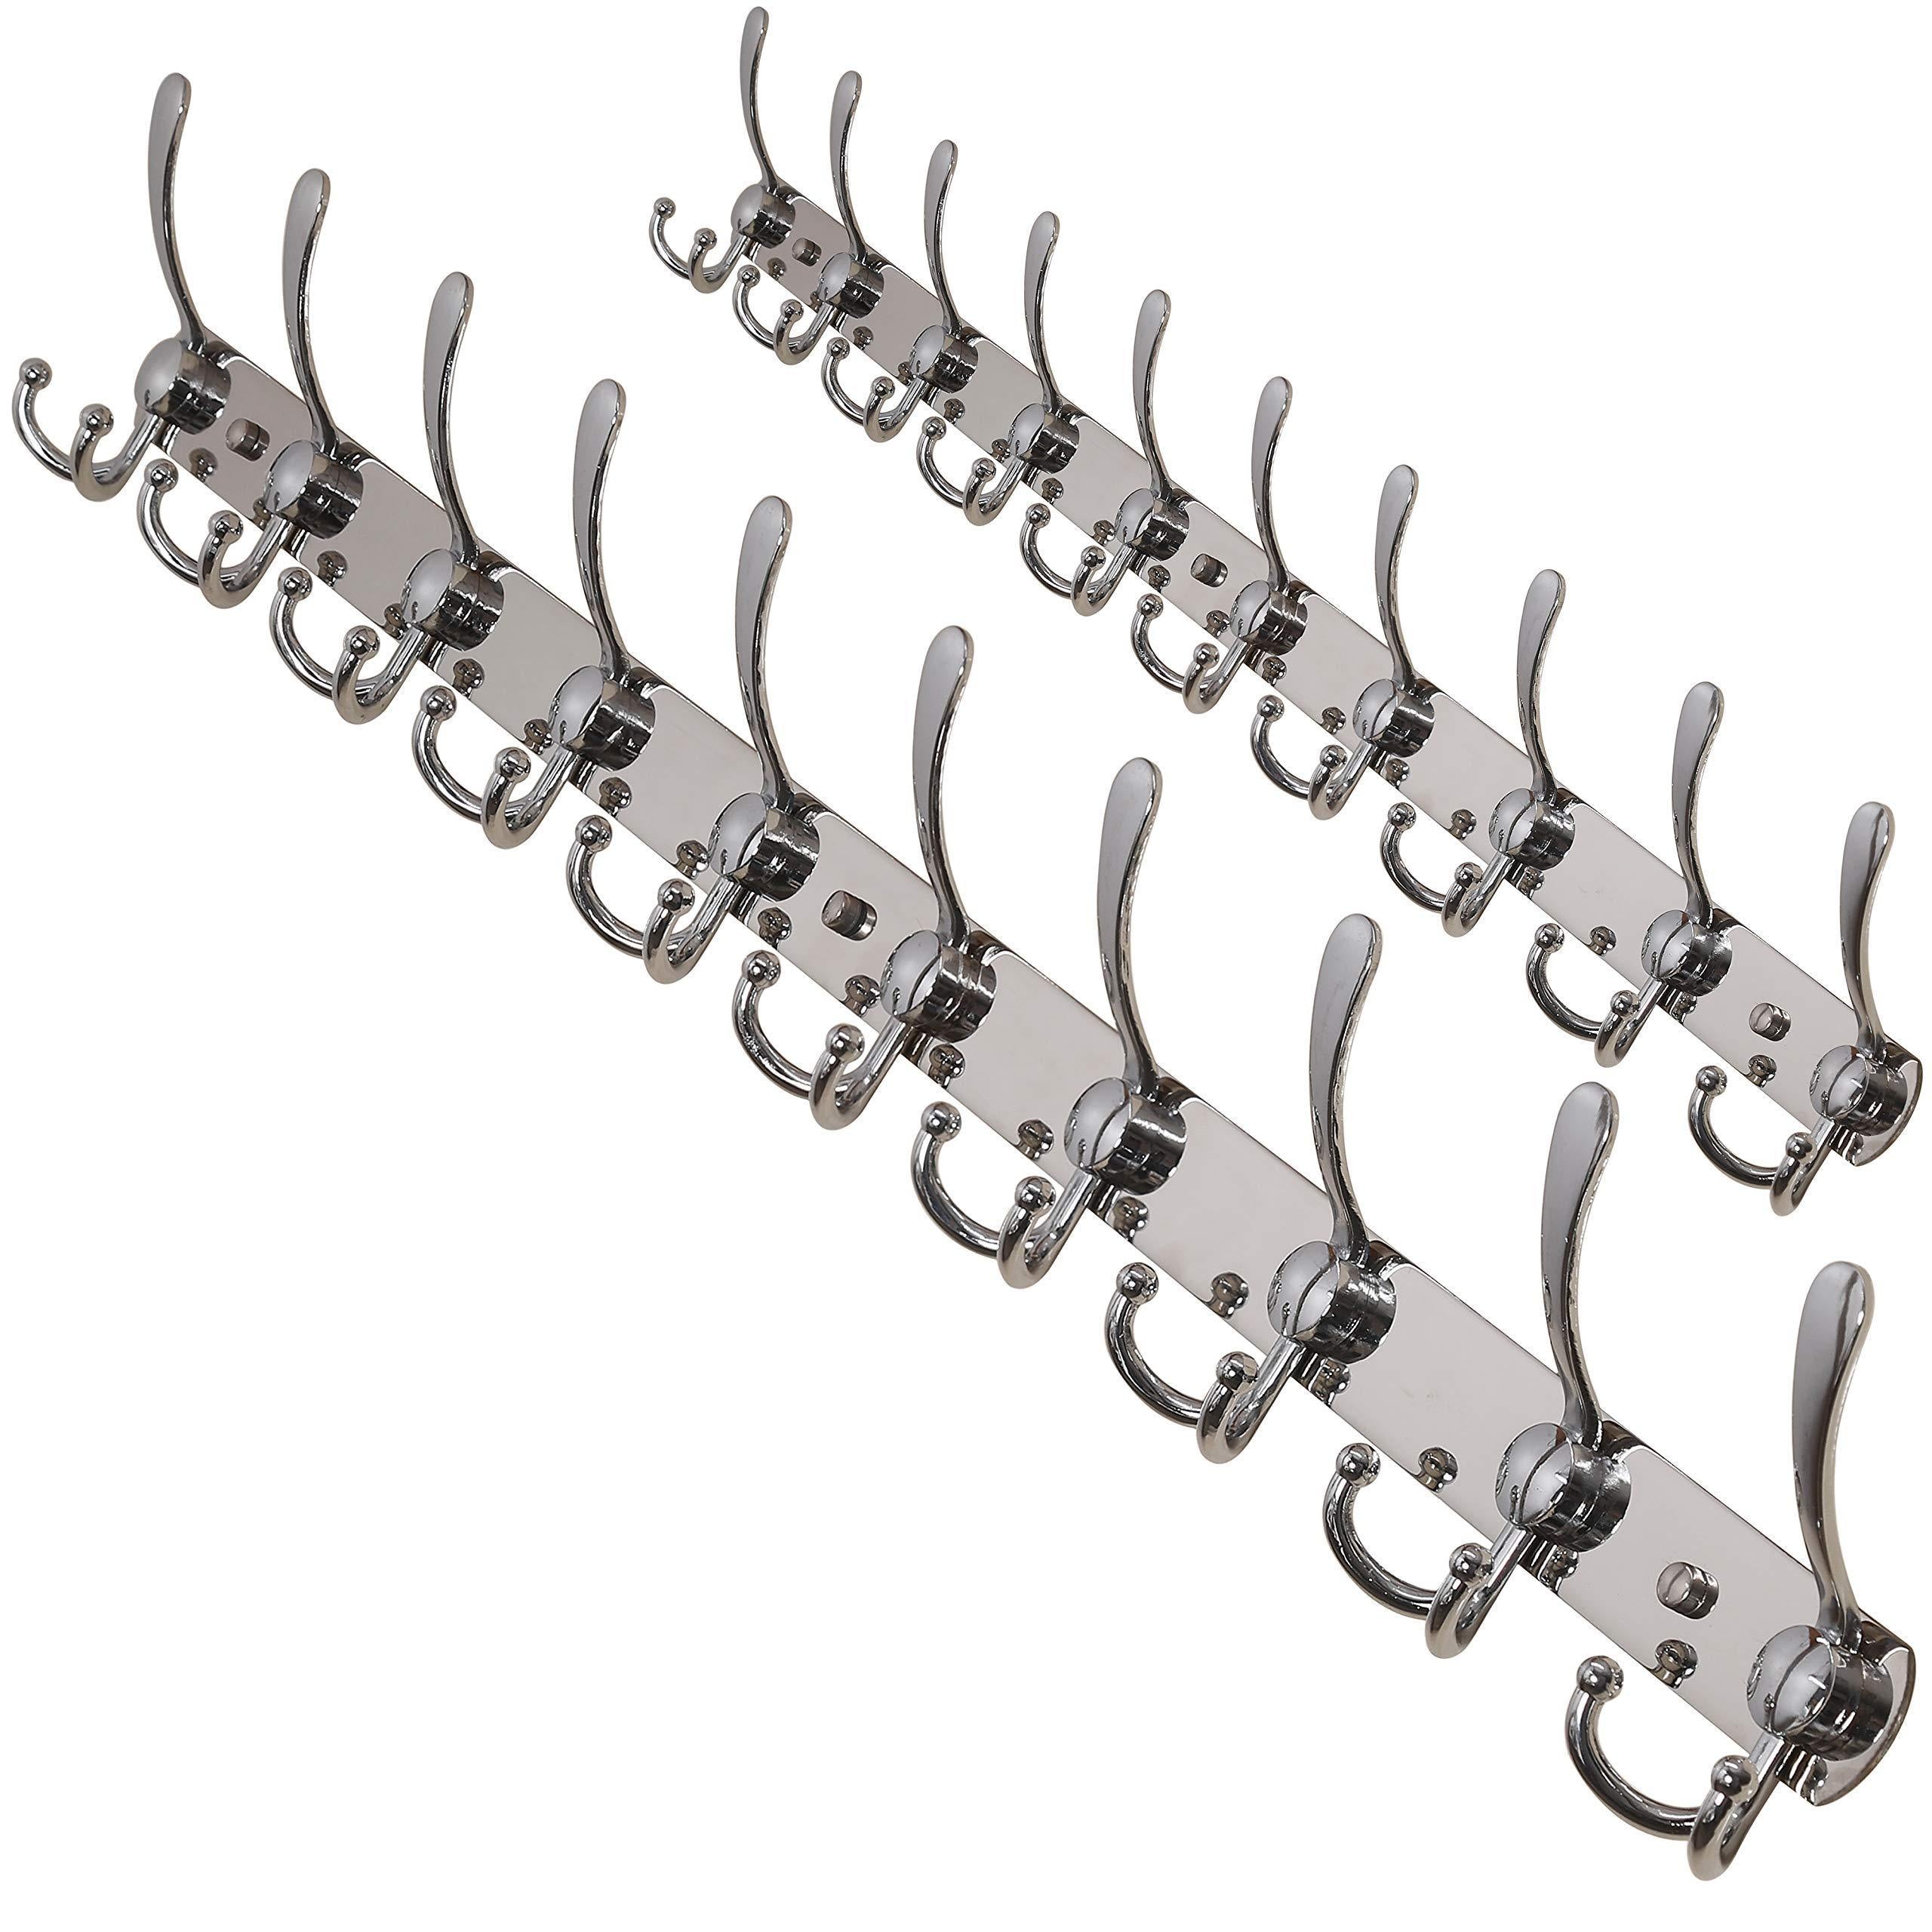 Top rated dseap wall mounted coat rack 10 tri hooks 37 5 8 long 16 hole to hole heavy duty stainless steel coat hook for coat hat towel robes mudroom bathroom entryway chromed 2 packs